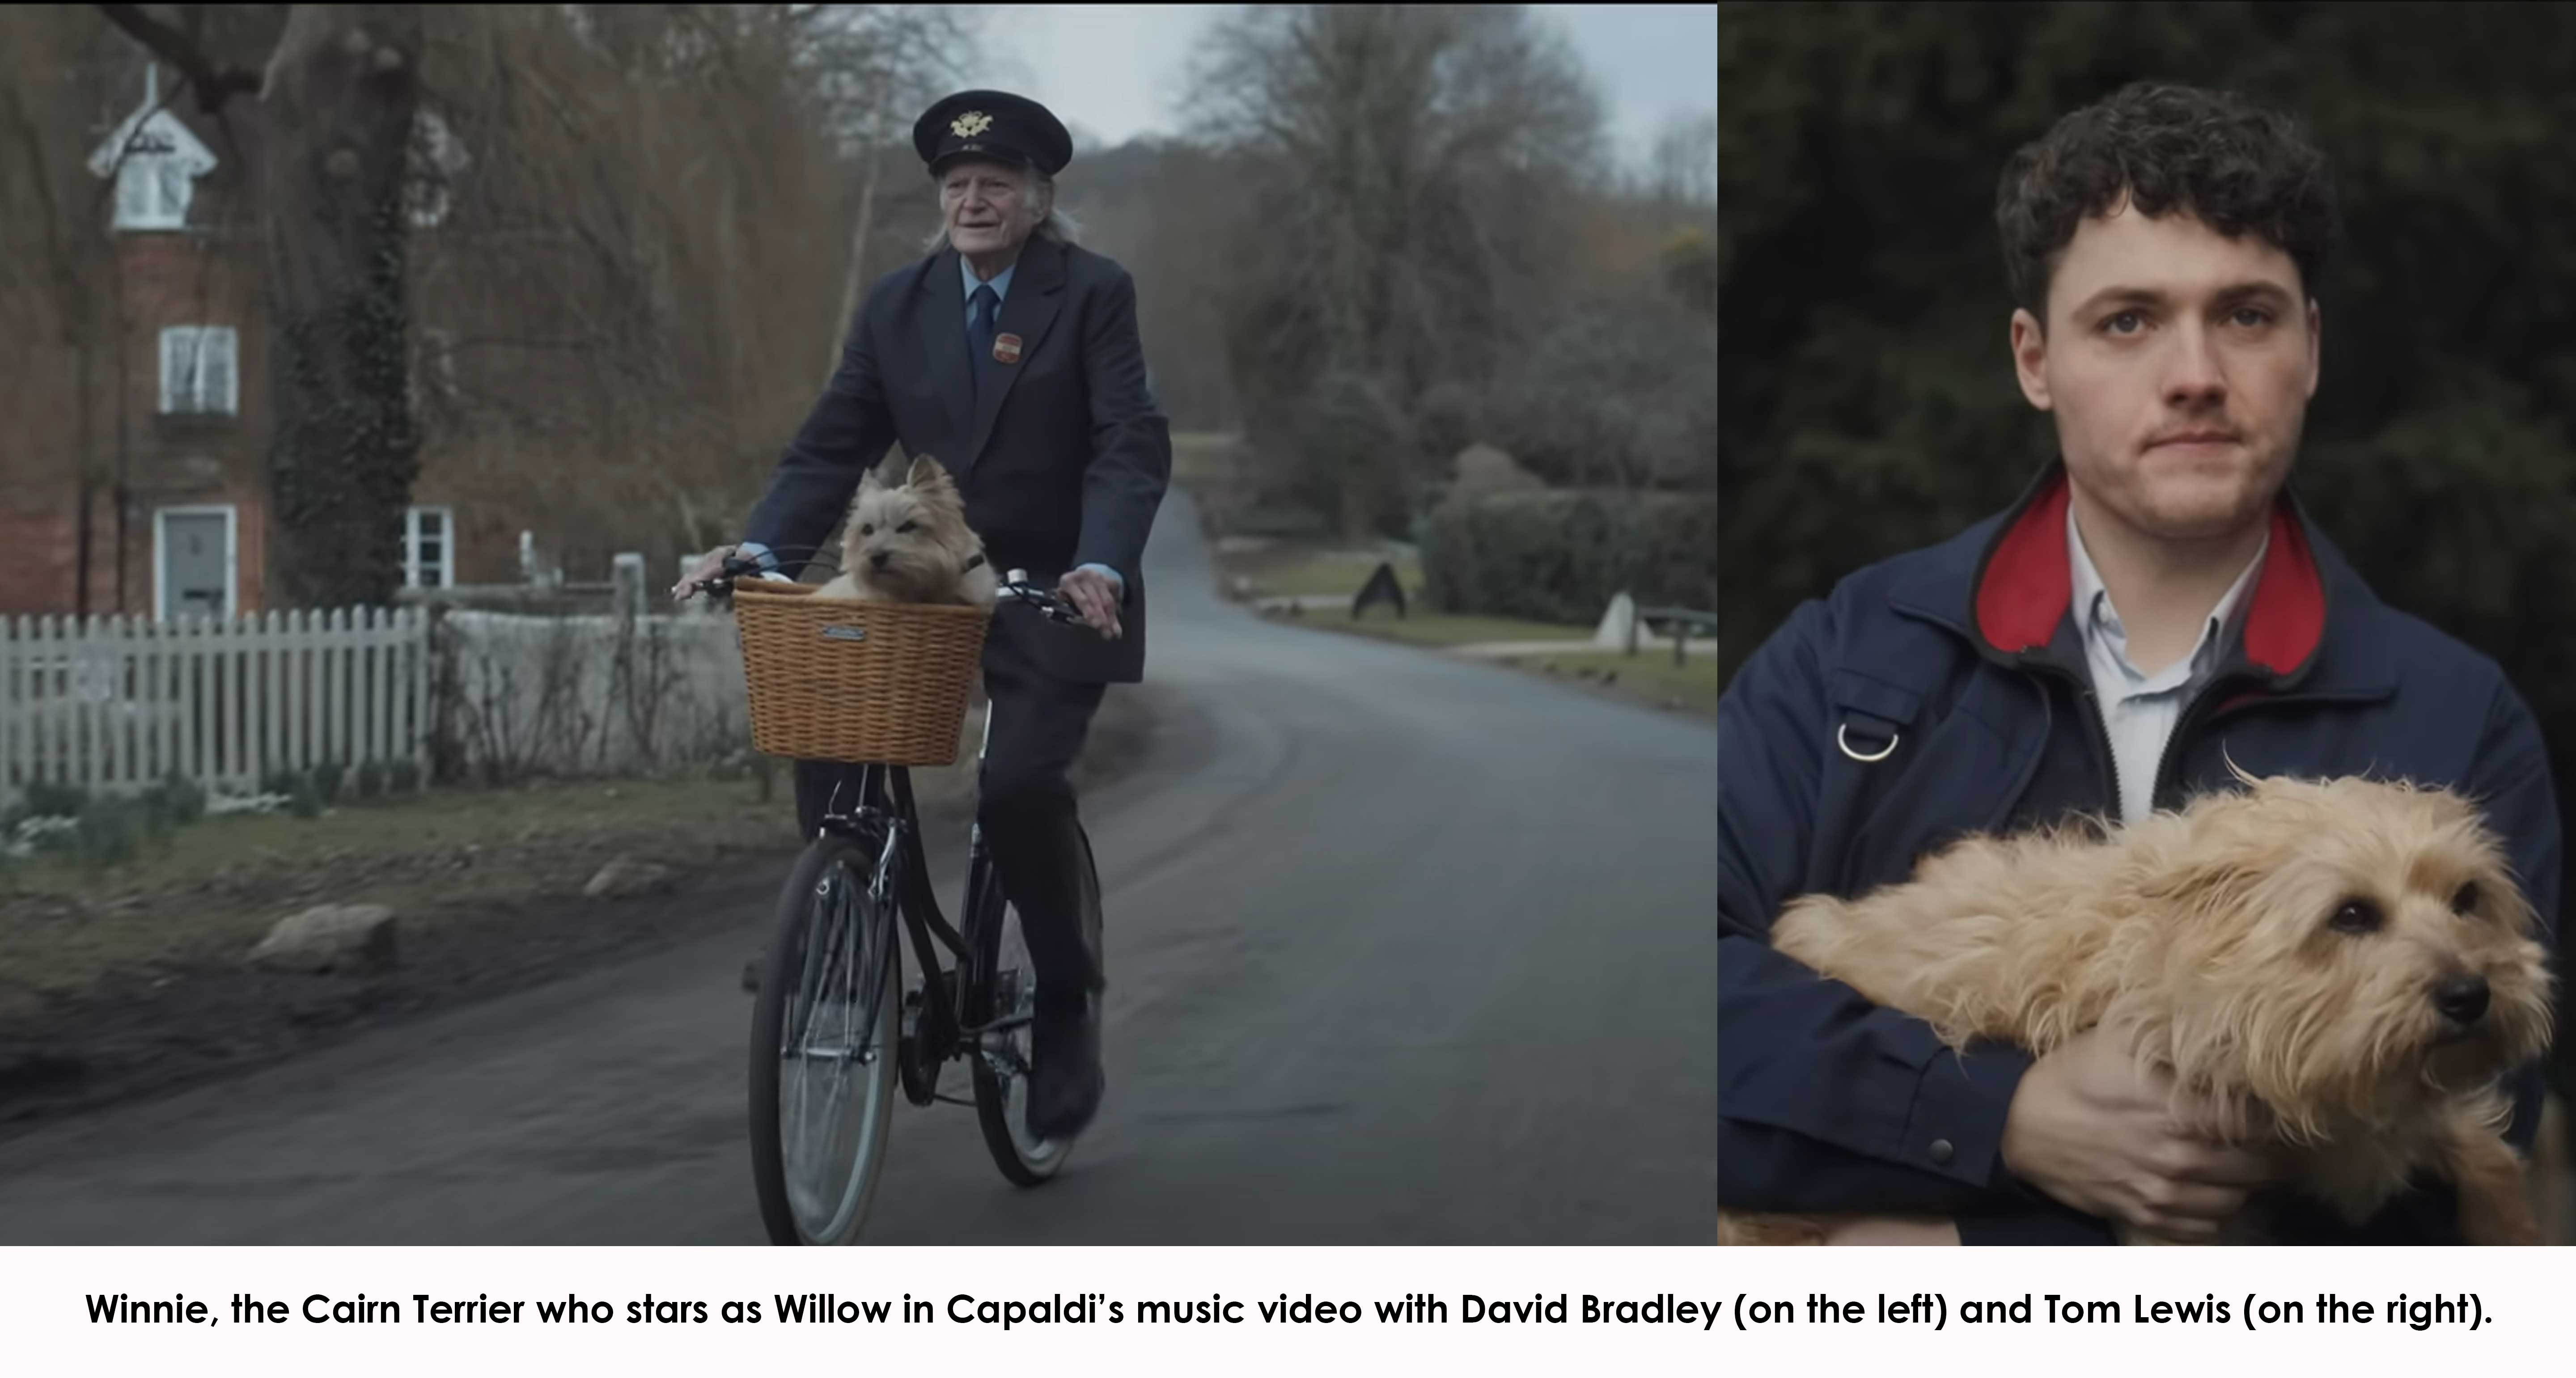 Winnie, the Cairn Terrier who stars as Willow in Capaldi's music video with David Bradley (on the left) and Tom Lewis (on the right)